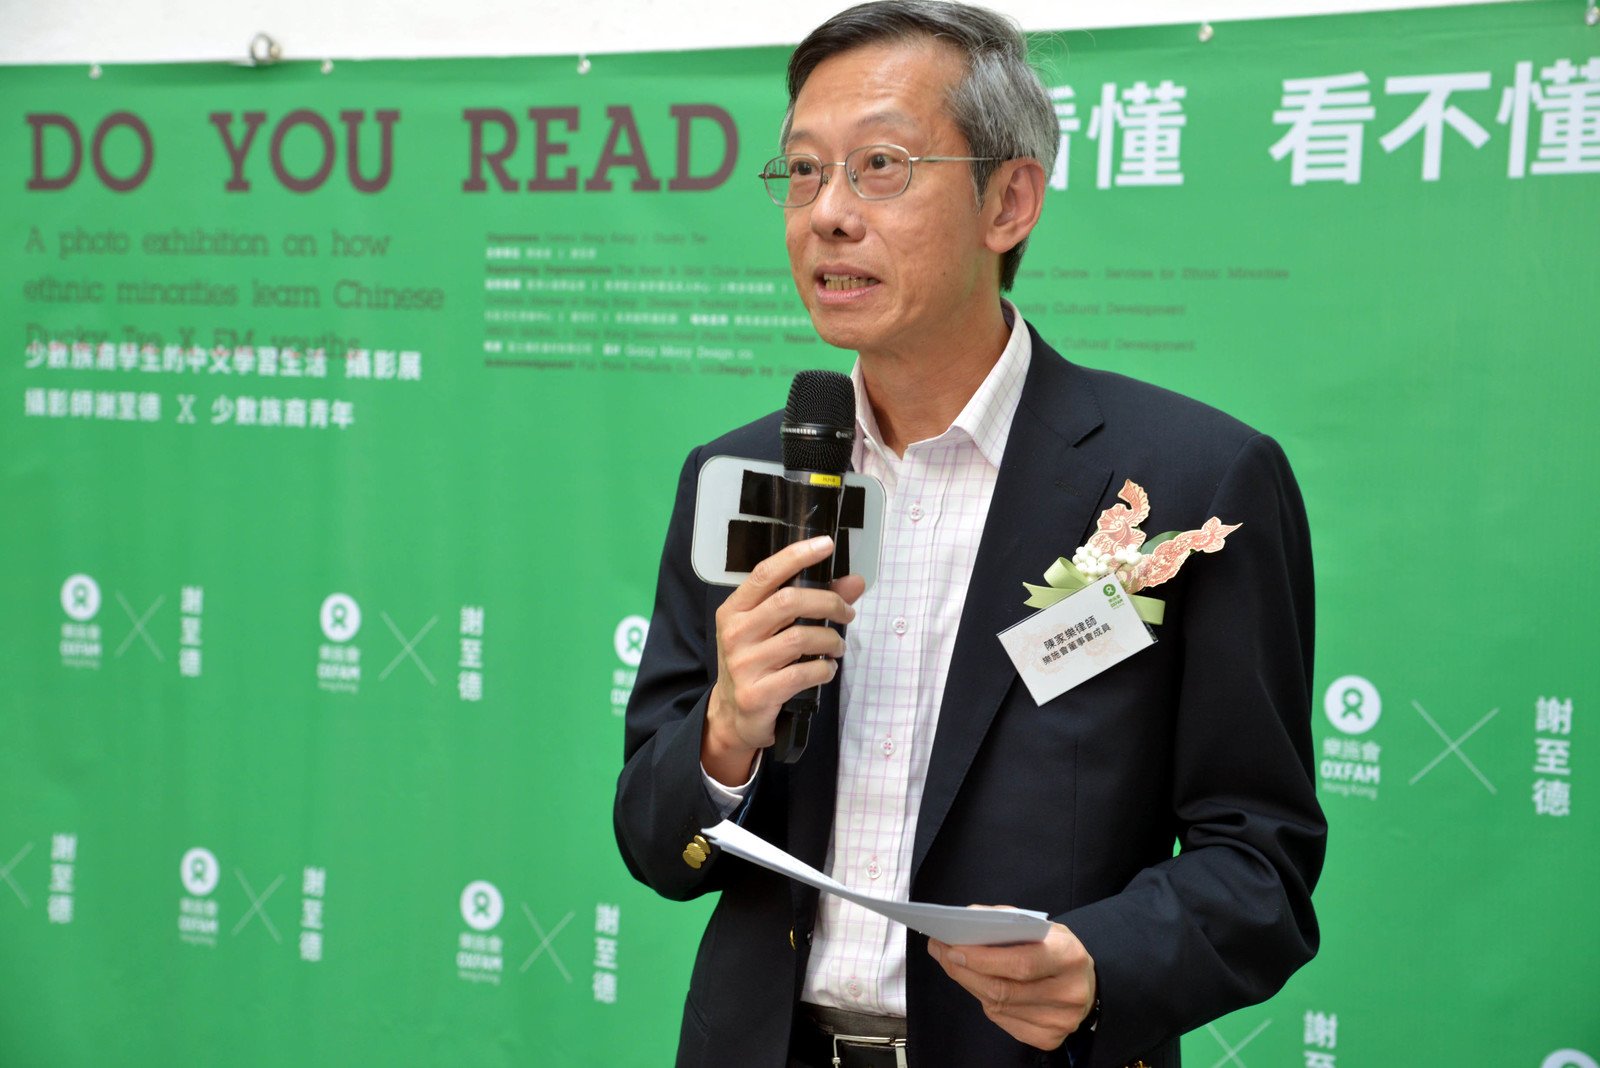 Walter Chan, Council member of Oxfam Hong Kong, delivered a welcome speech at Oxfam’s ‘Do you read me? A photo exhibition on how ethnic minorities learn Chinese’ launching ceremony held today.